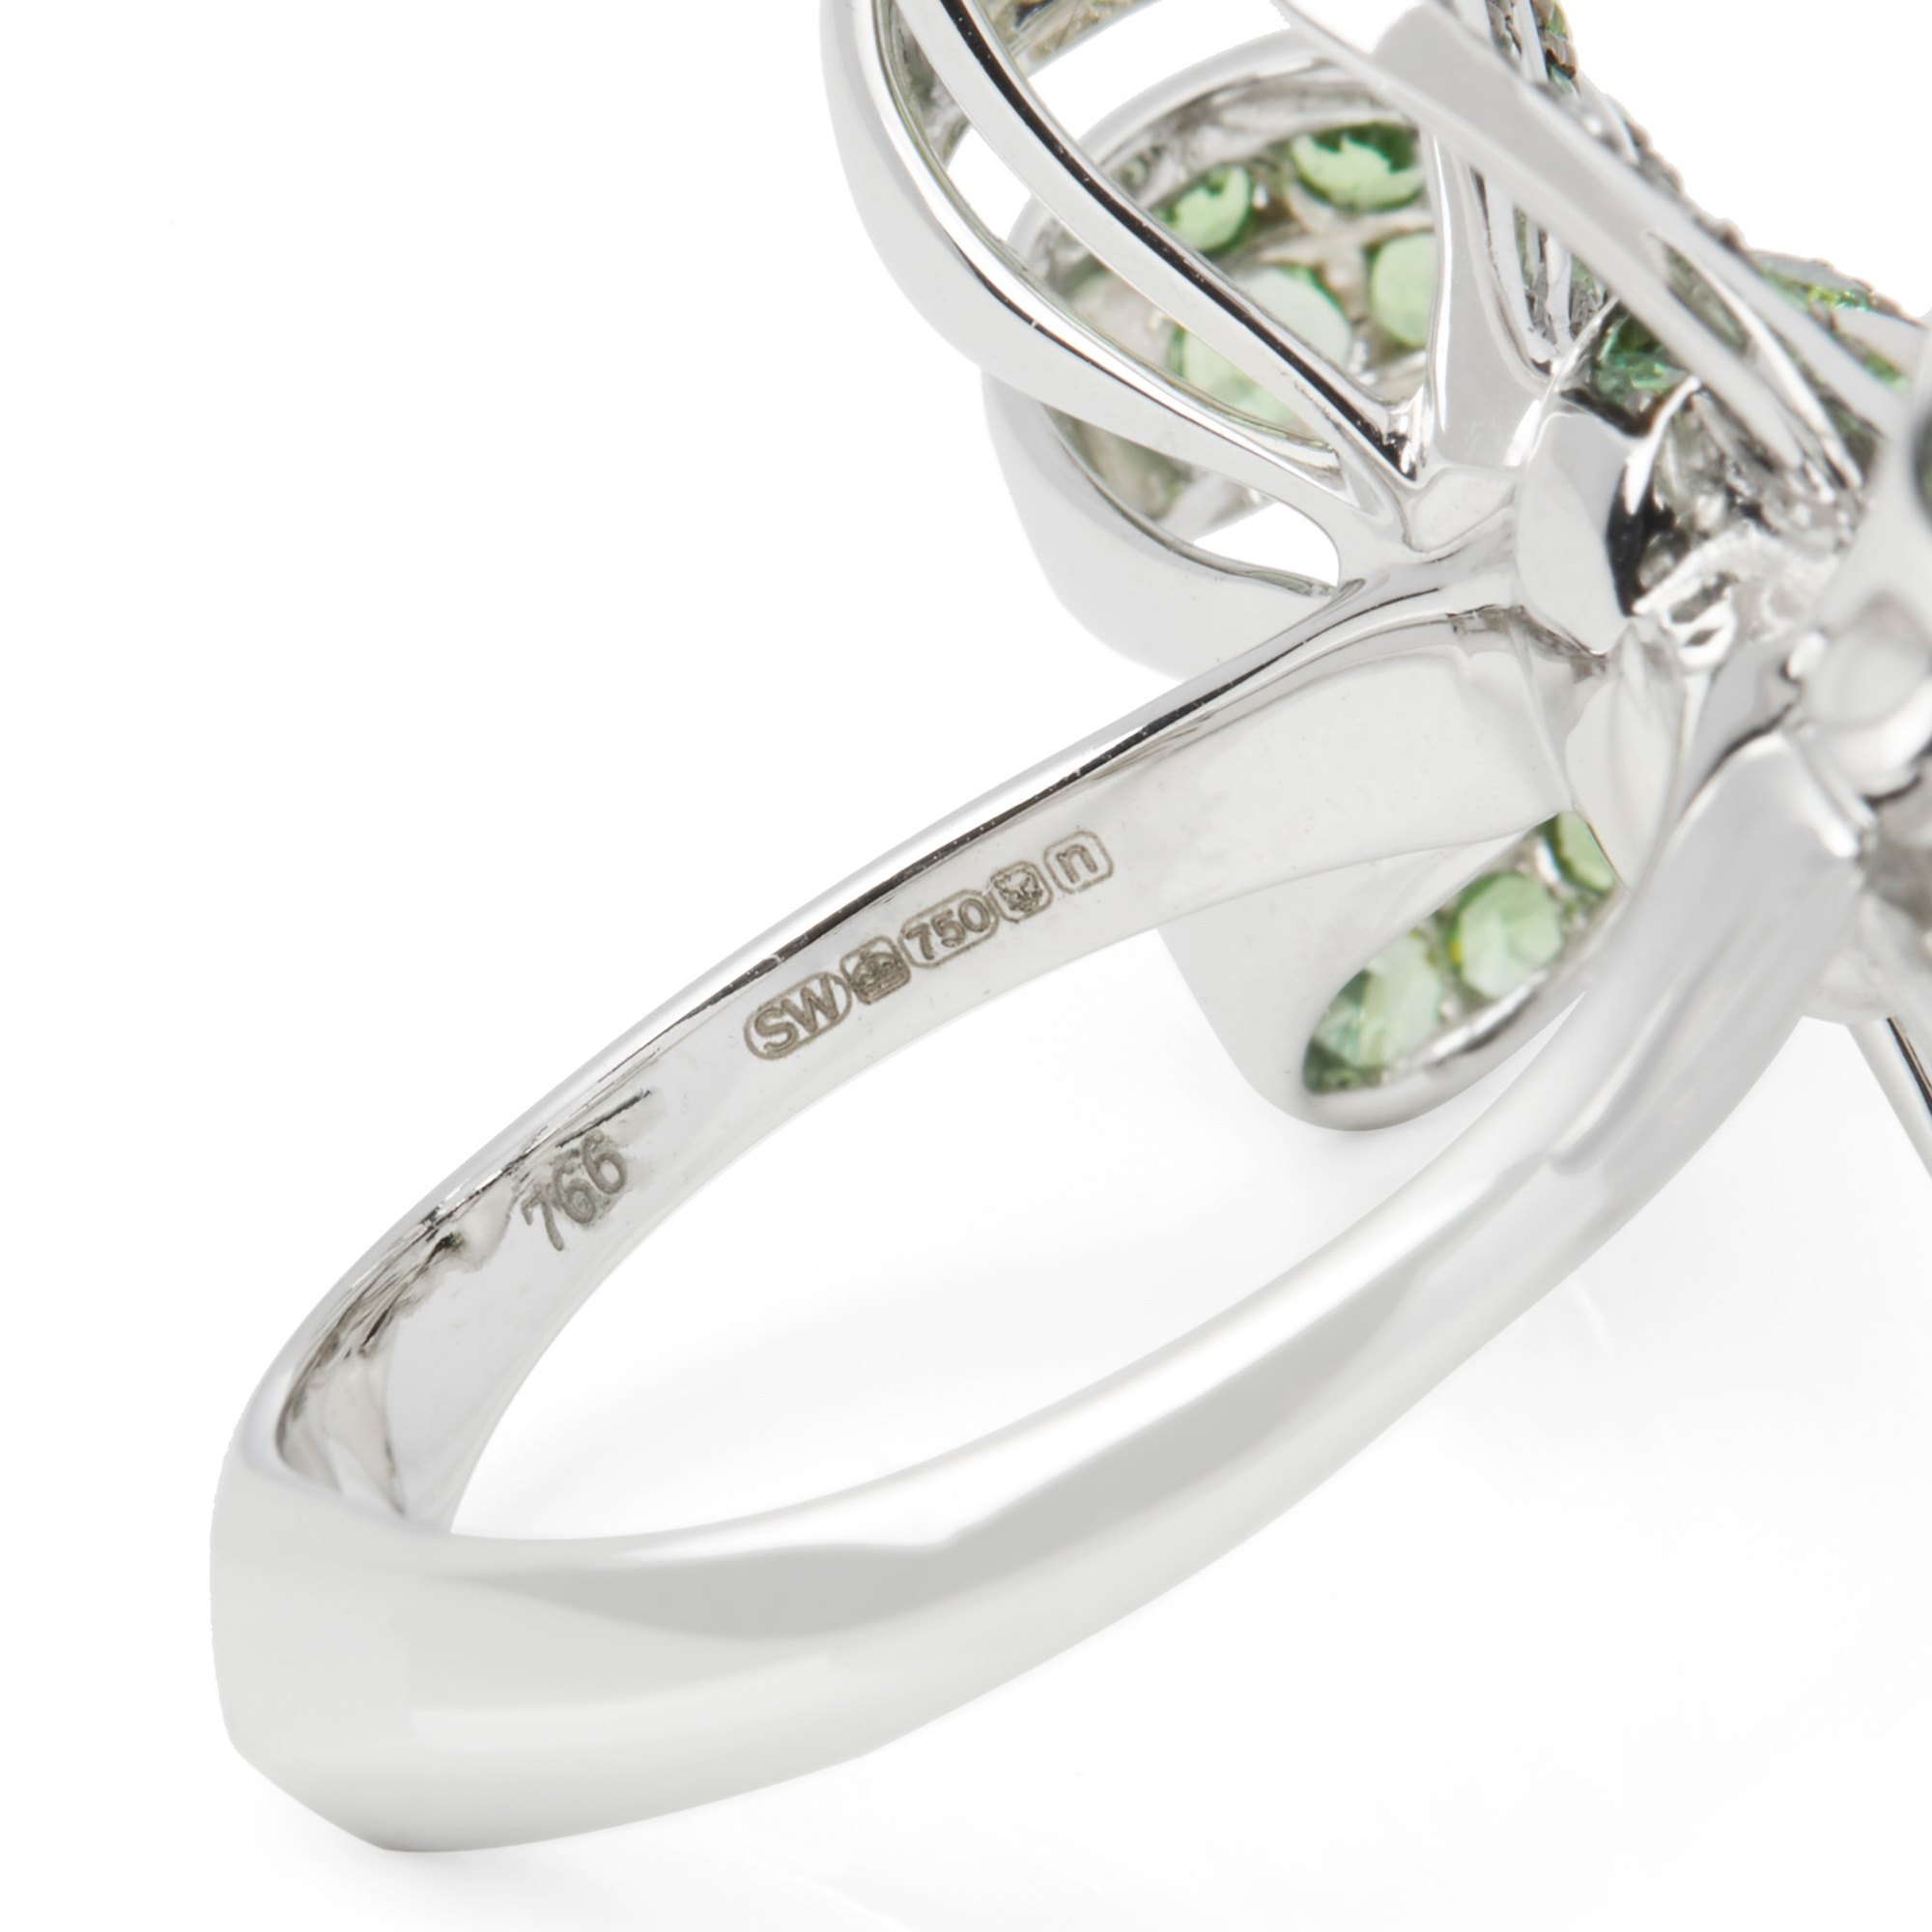 Stephen Webster 18ct White Gold Forget me Not Pave Tsavorite Bow Ring